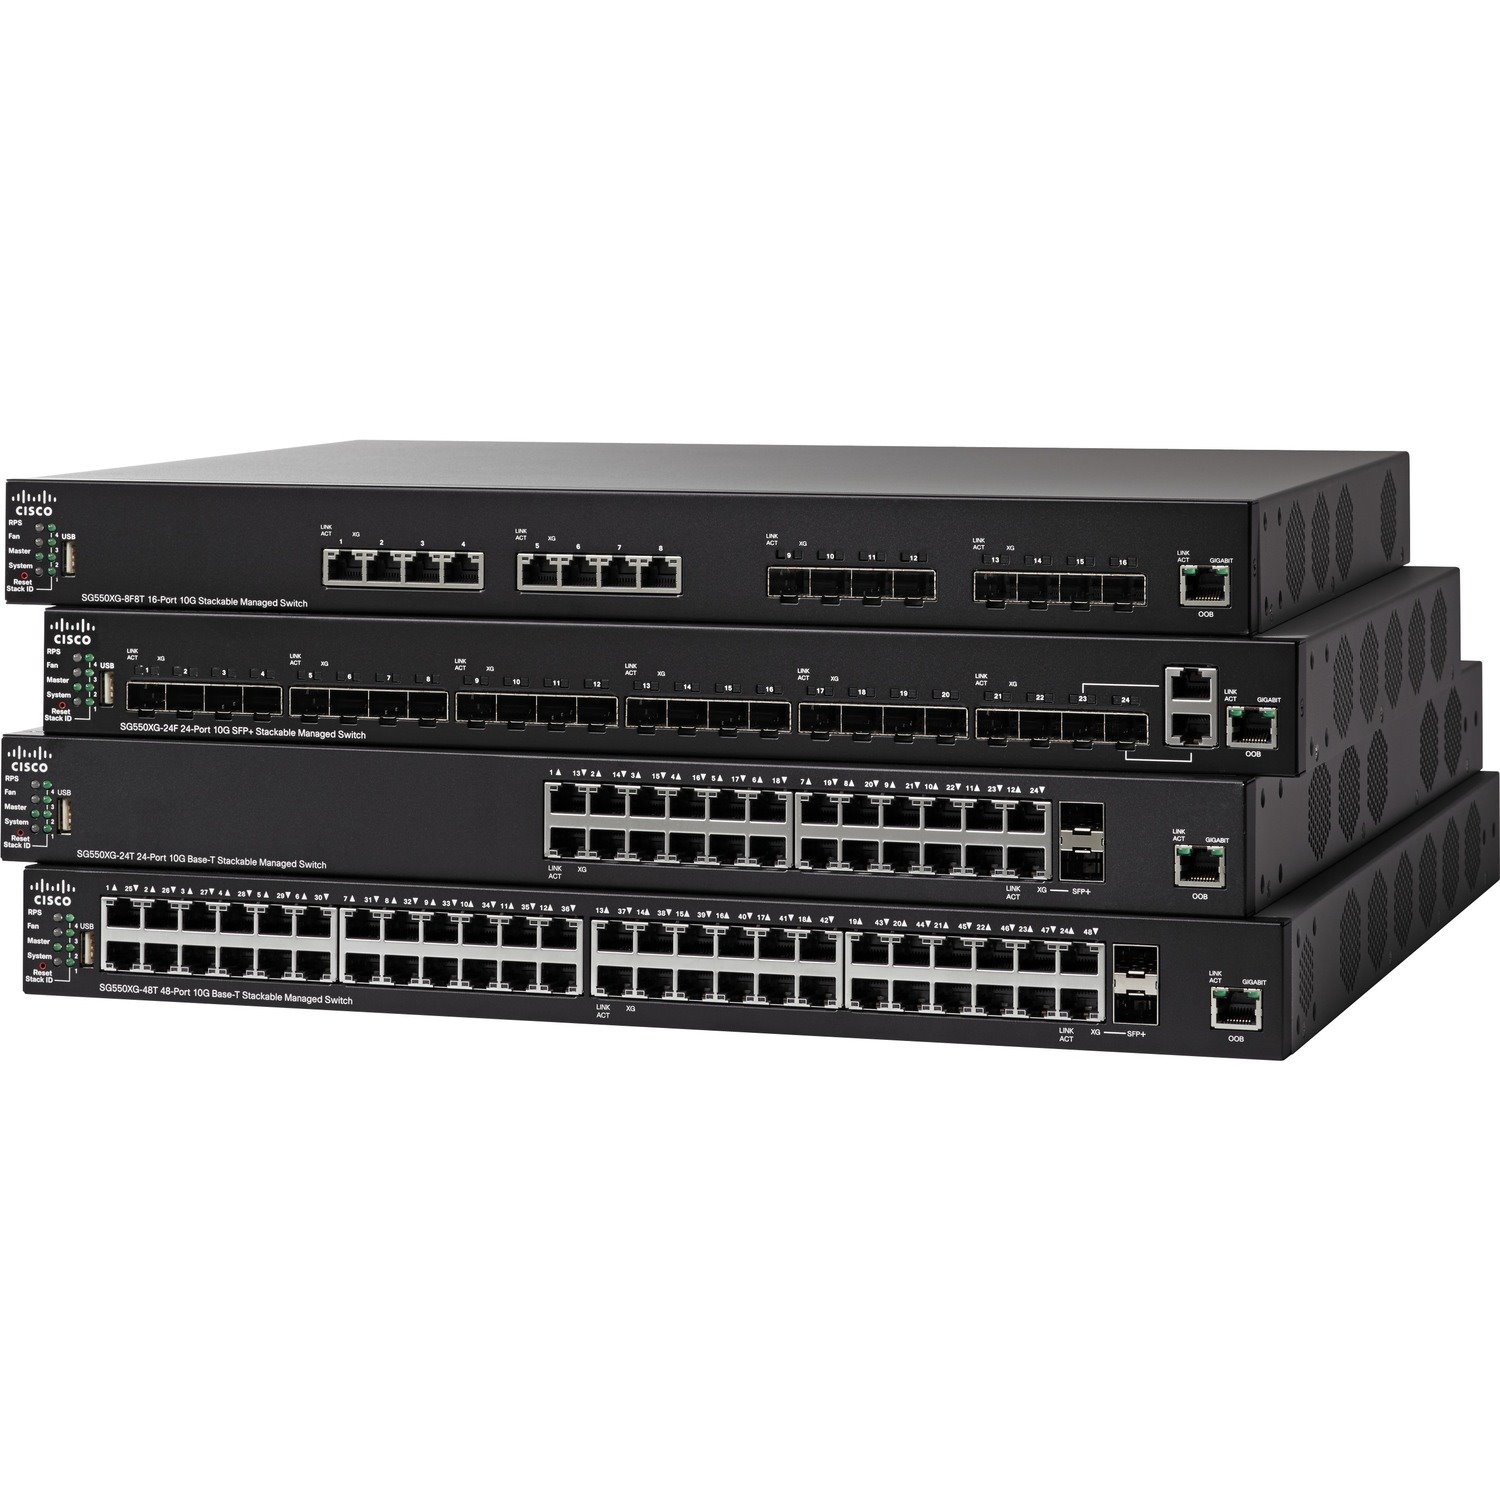 Cisco 550X SG550X-24 26 Ports Manageable Layer 3 Switch - Gigabit Ethernet